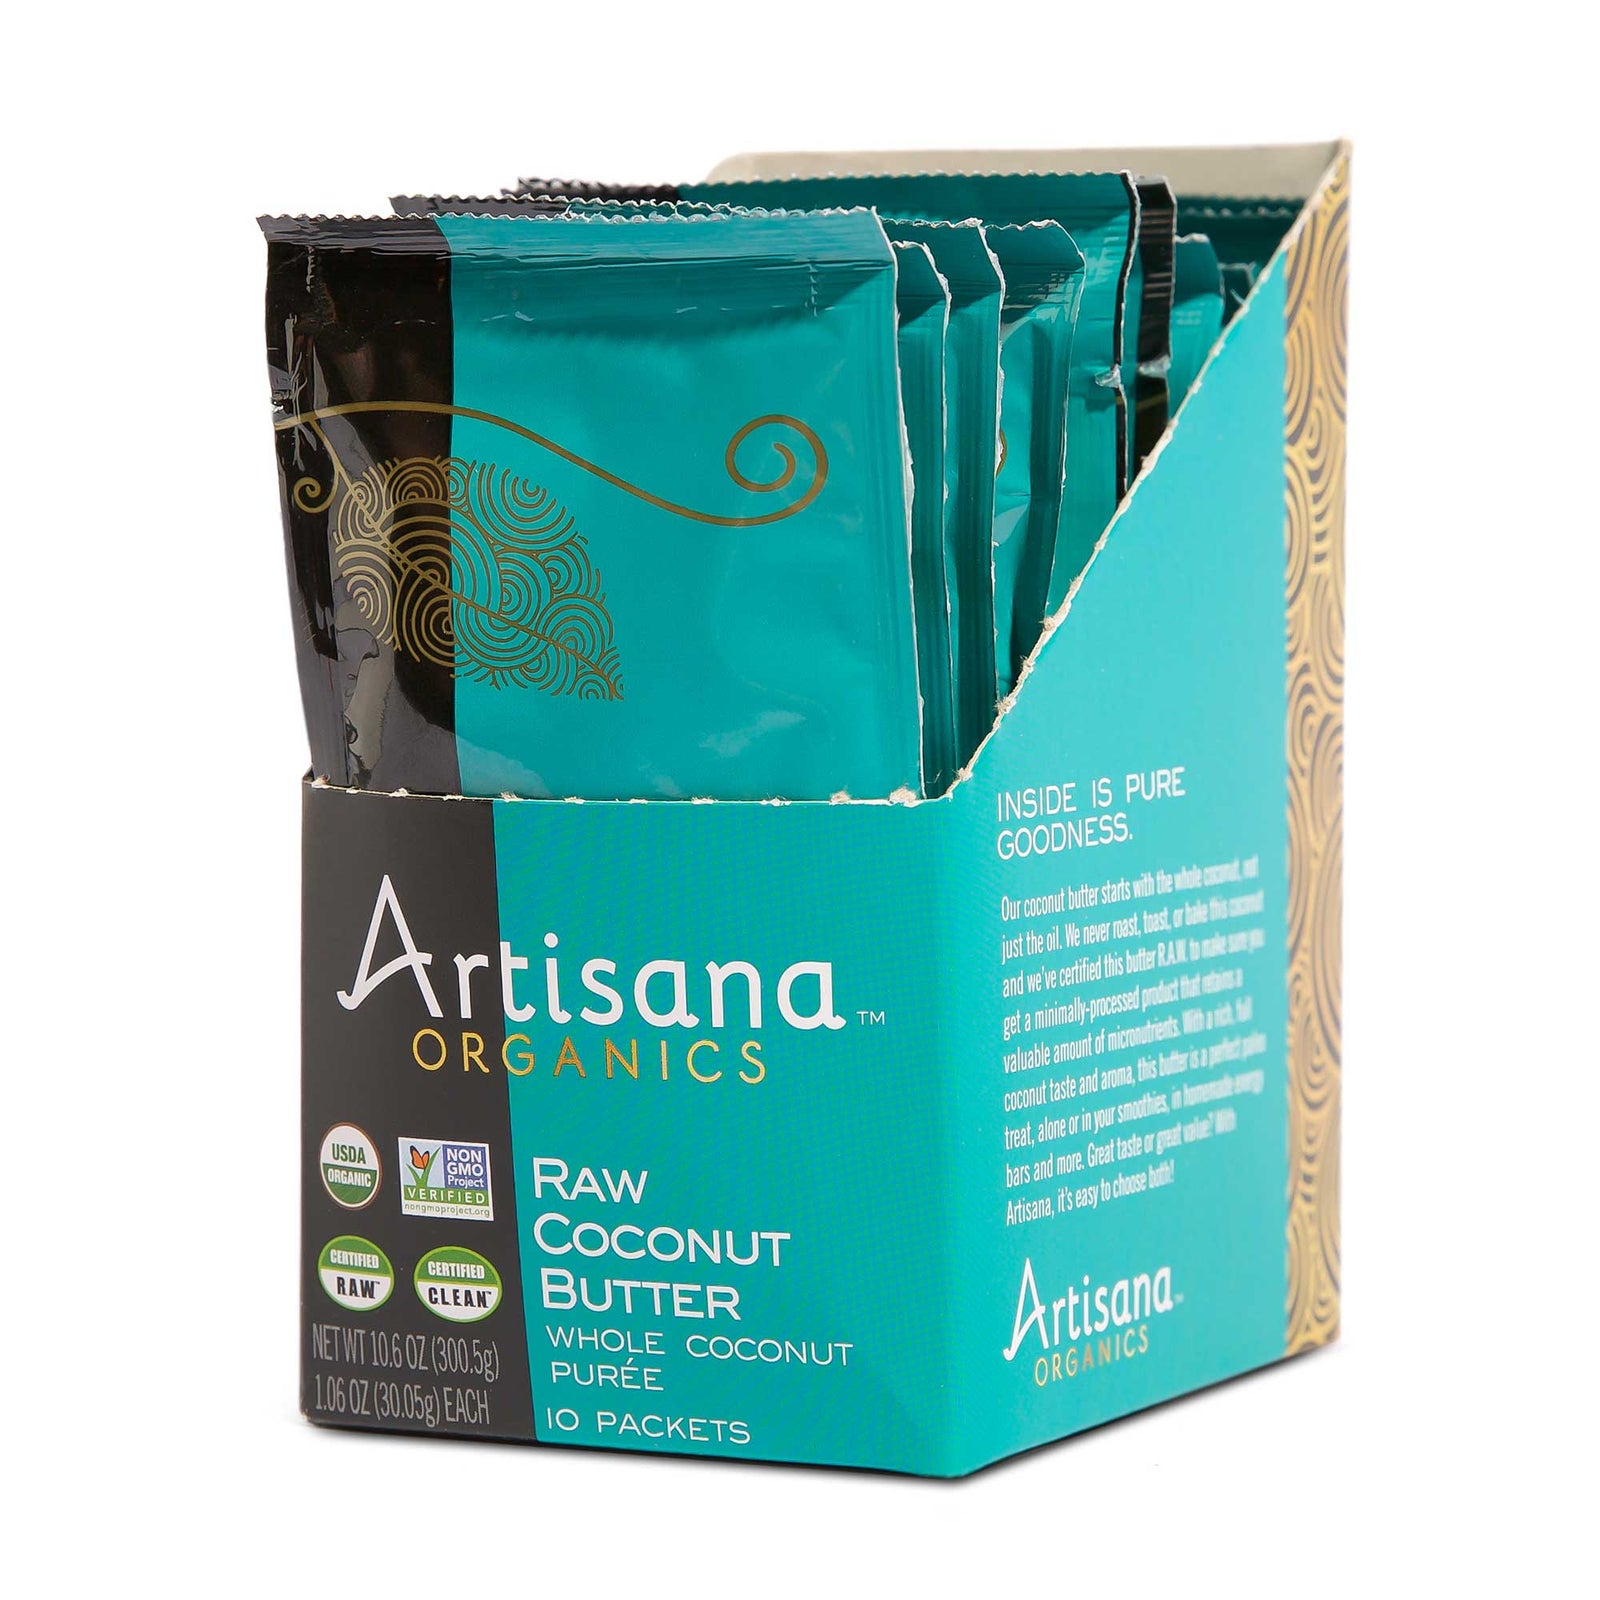 Box of Artisana Raw Coconut Butter 10 Snack Packets